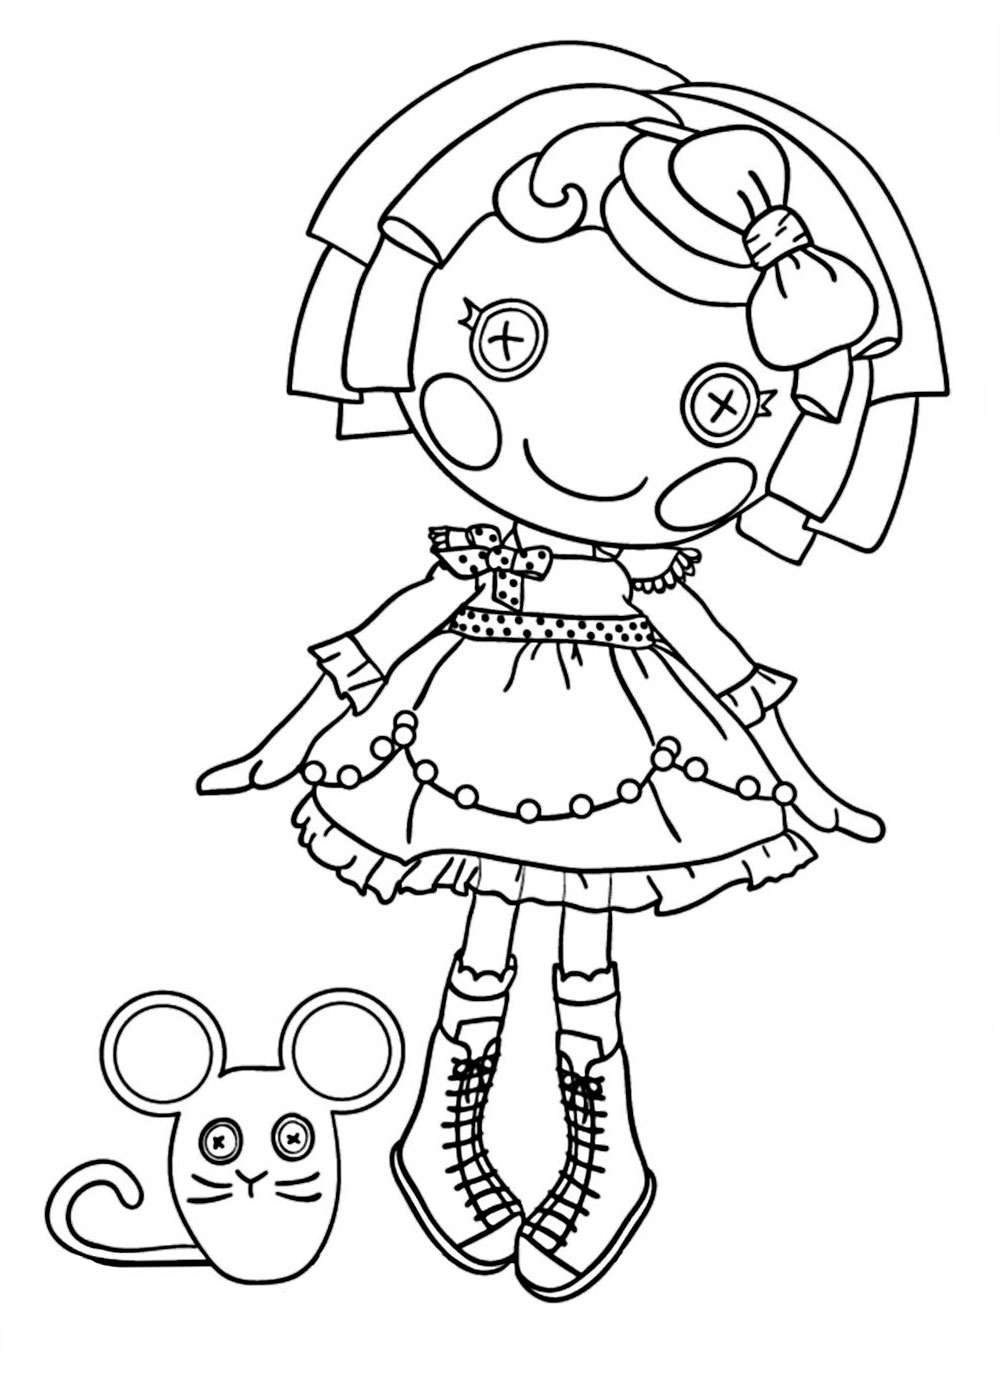 Lalaloopsy coloring pages for girls to print for free